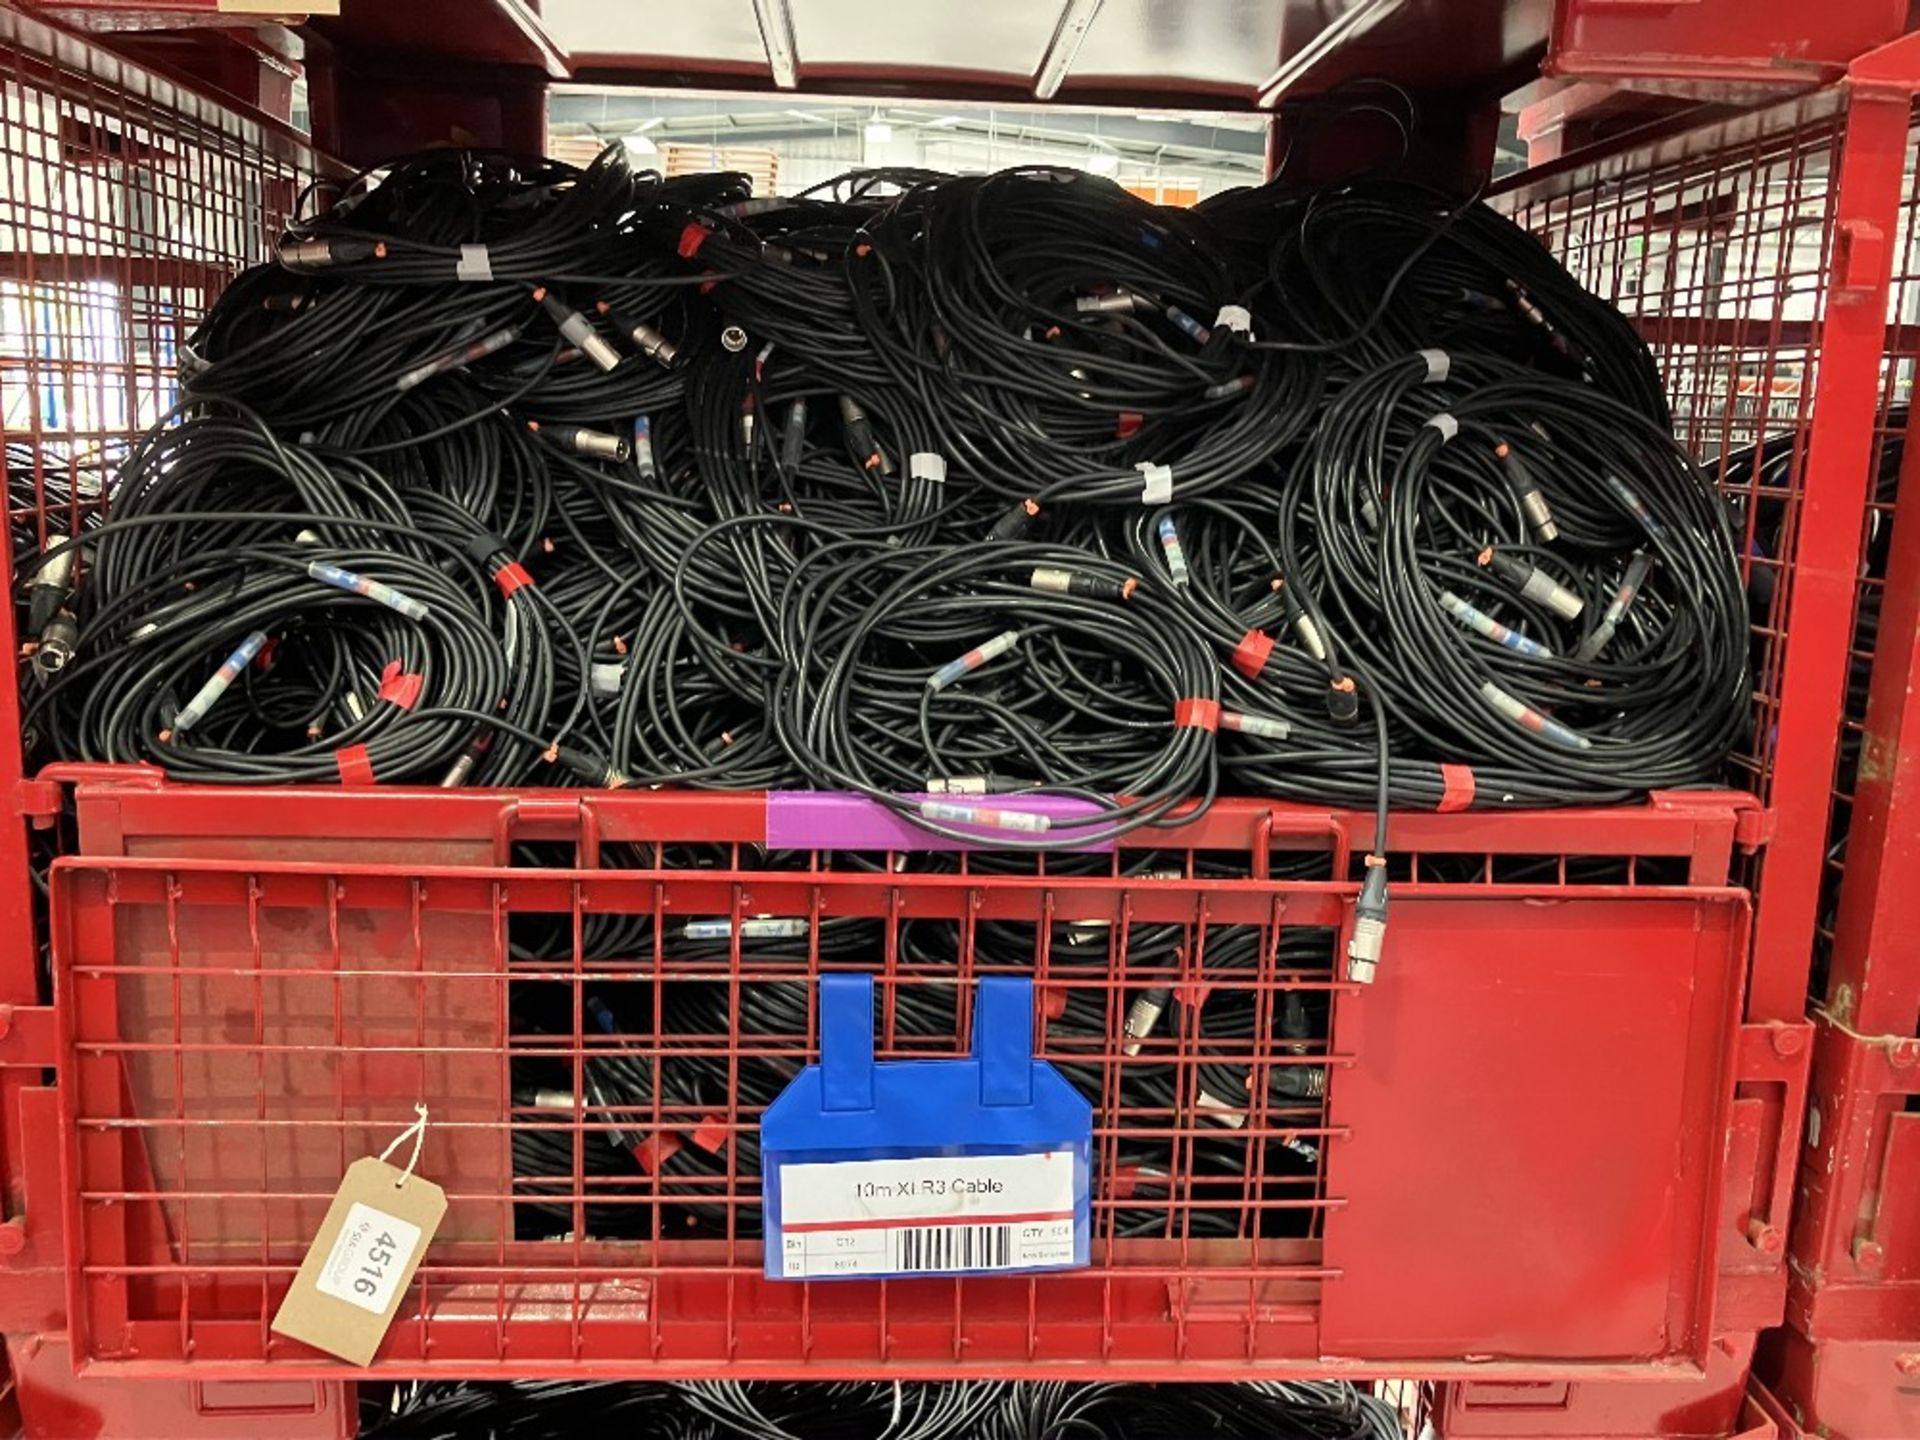 Large Quantity of 10m XLR3 Cable with Steel Fabricated Stillage